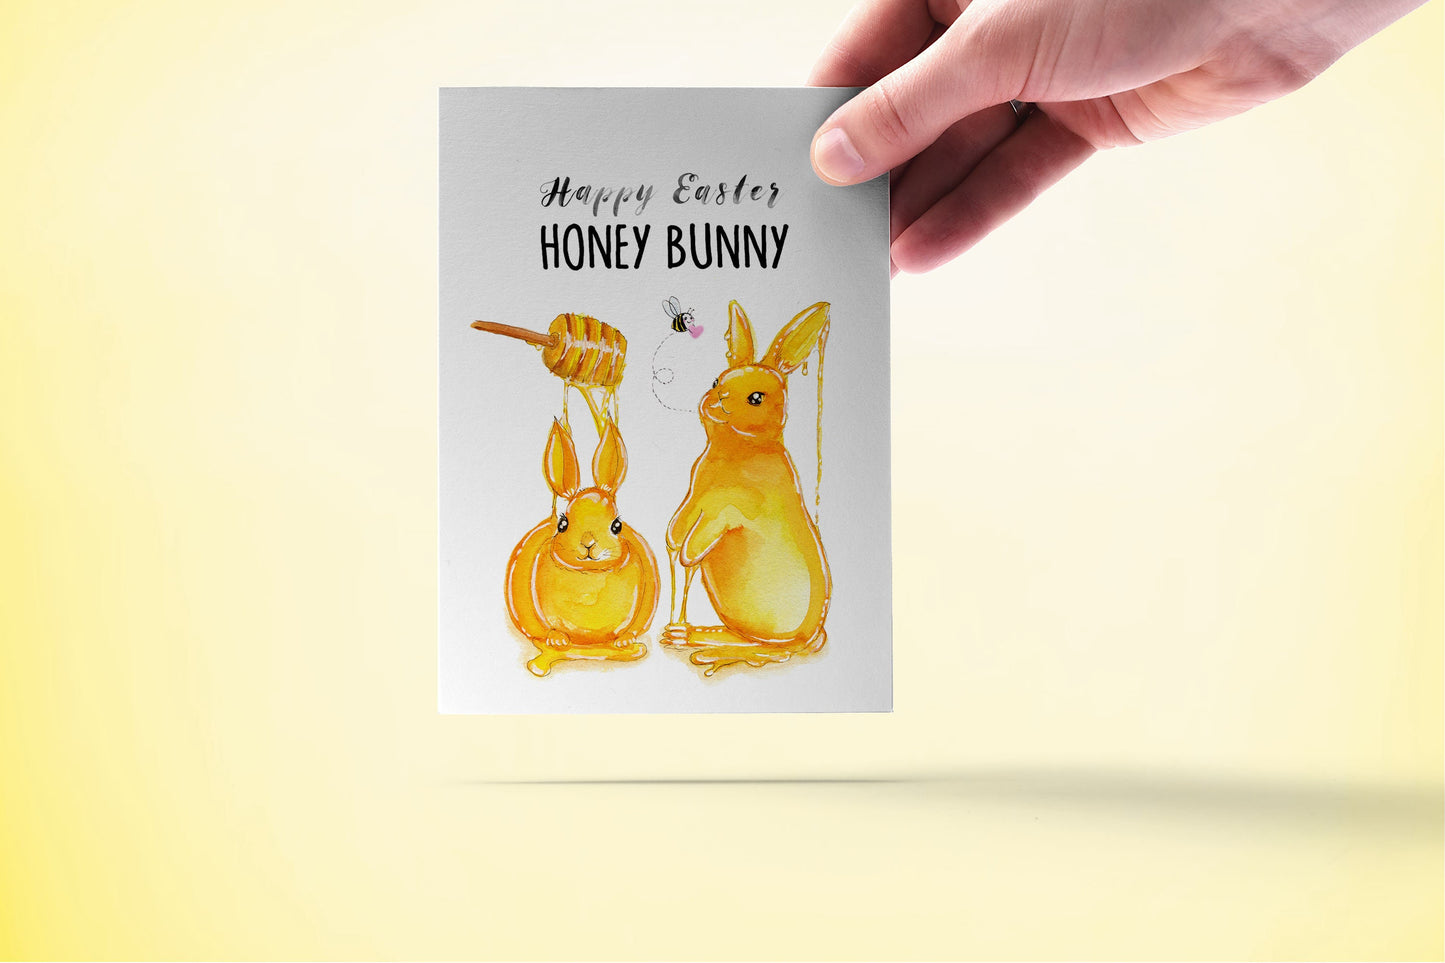 Honey Bunny Funny Easter Cards For Kids - Watercolor Happy Easter Bunny Card For Grandkids - Liyana Studio Greeting Cards Handmade